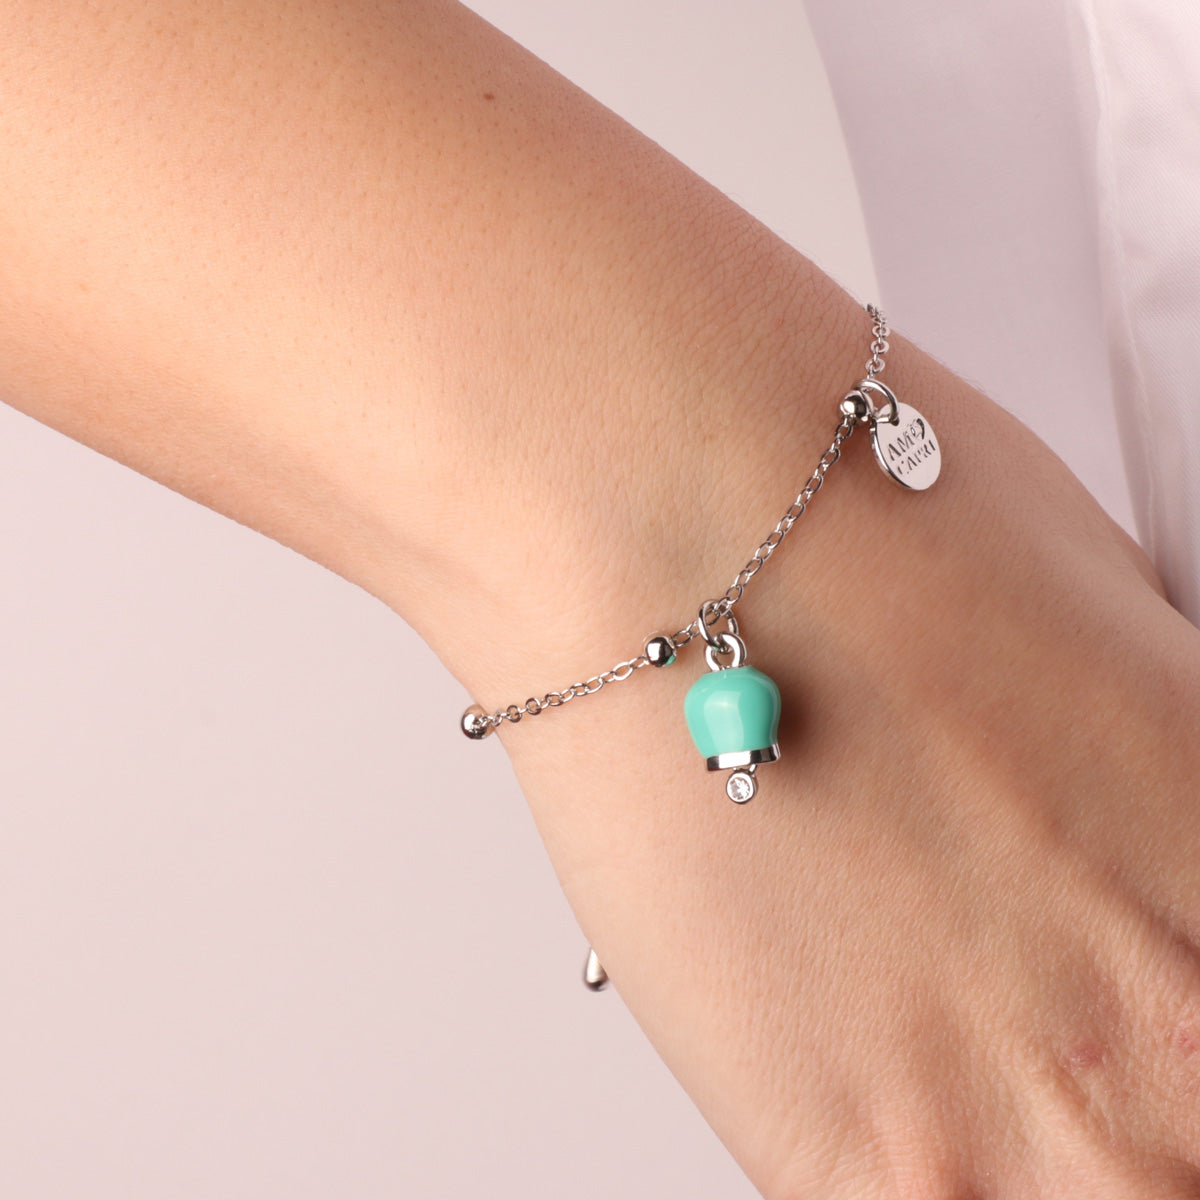 Metal bracelet with pendant lucky charm, embellished with water -green enamel and light point